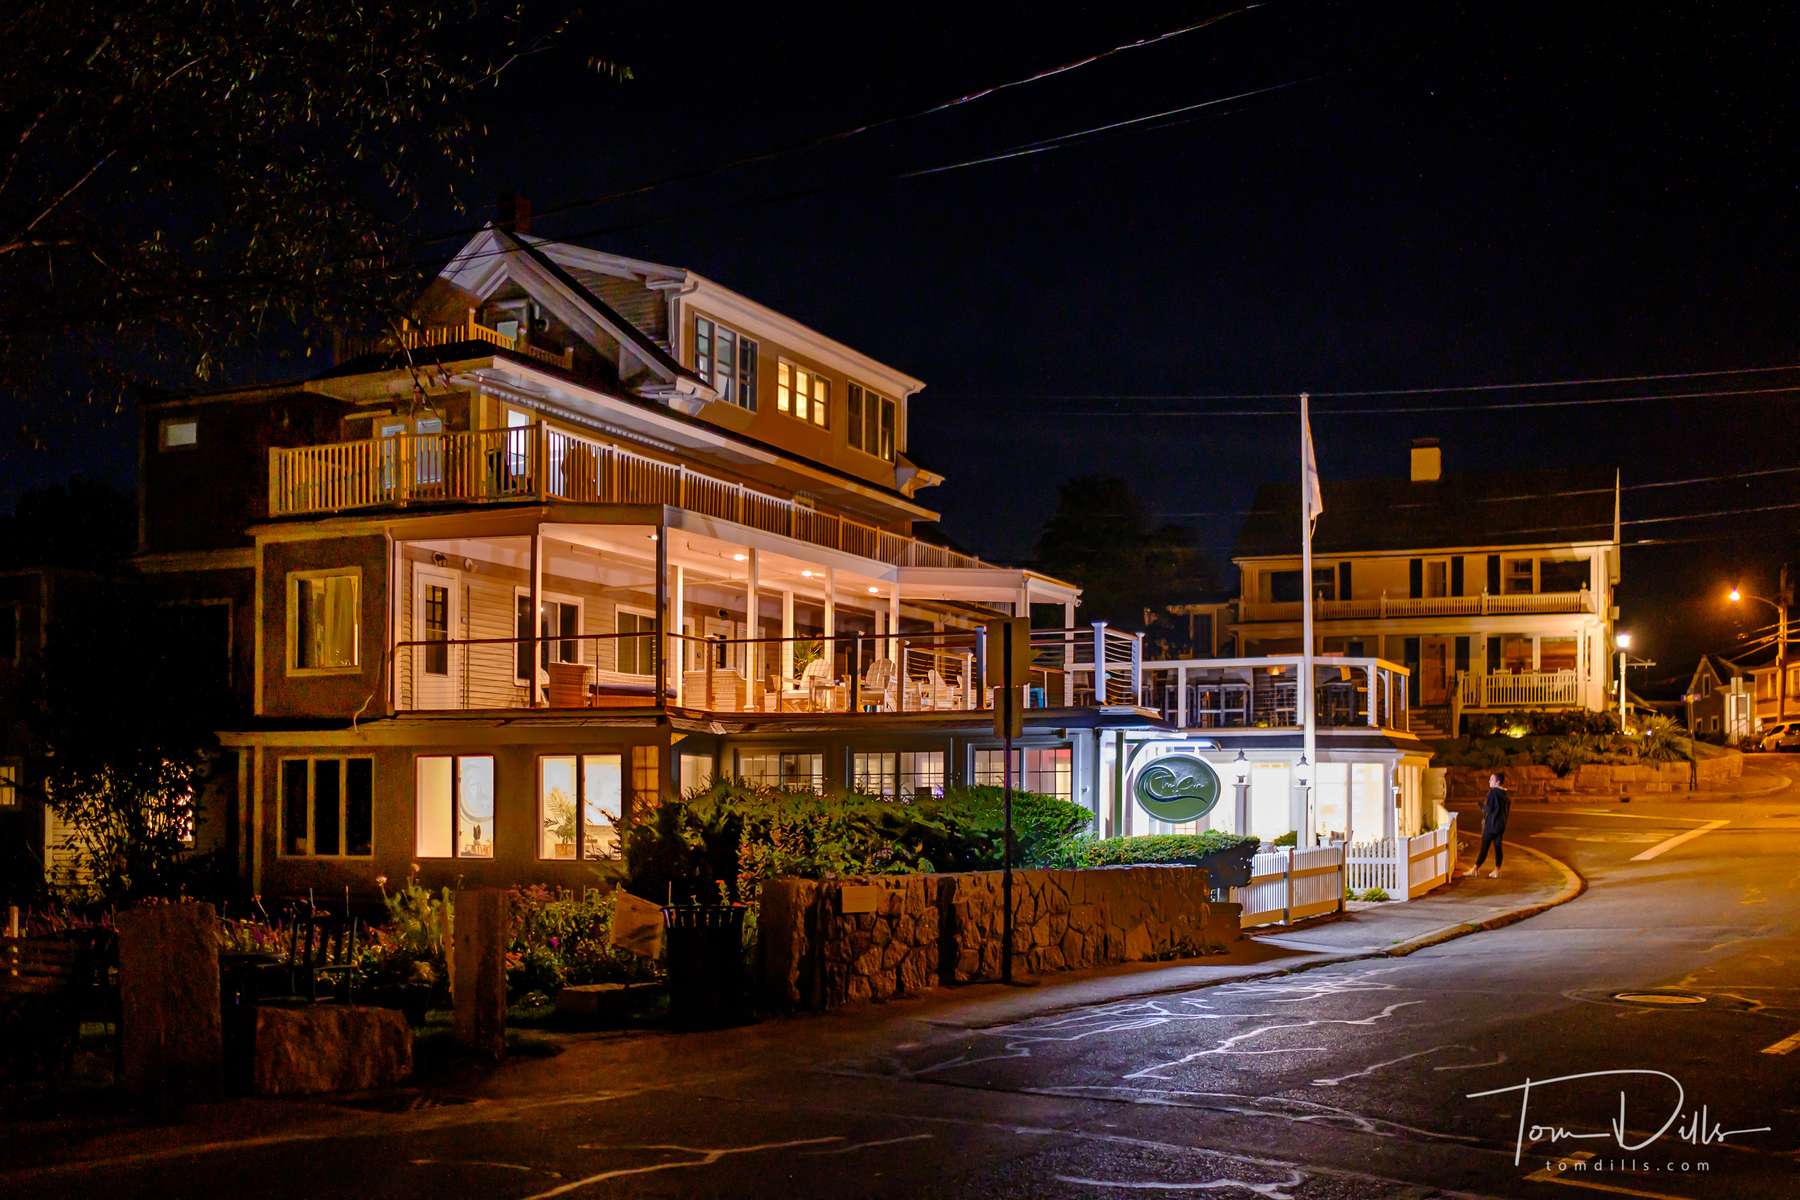 The Cove at Rockport Hotel in Rockport, Massachusetts